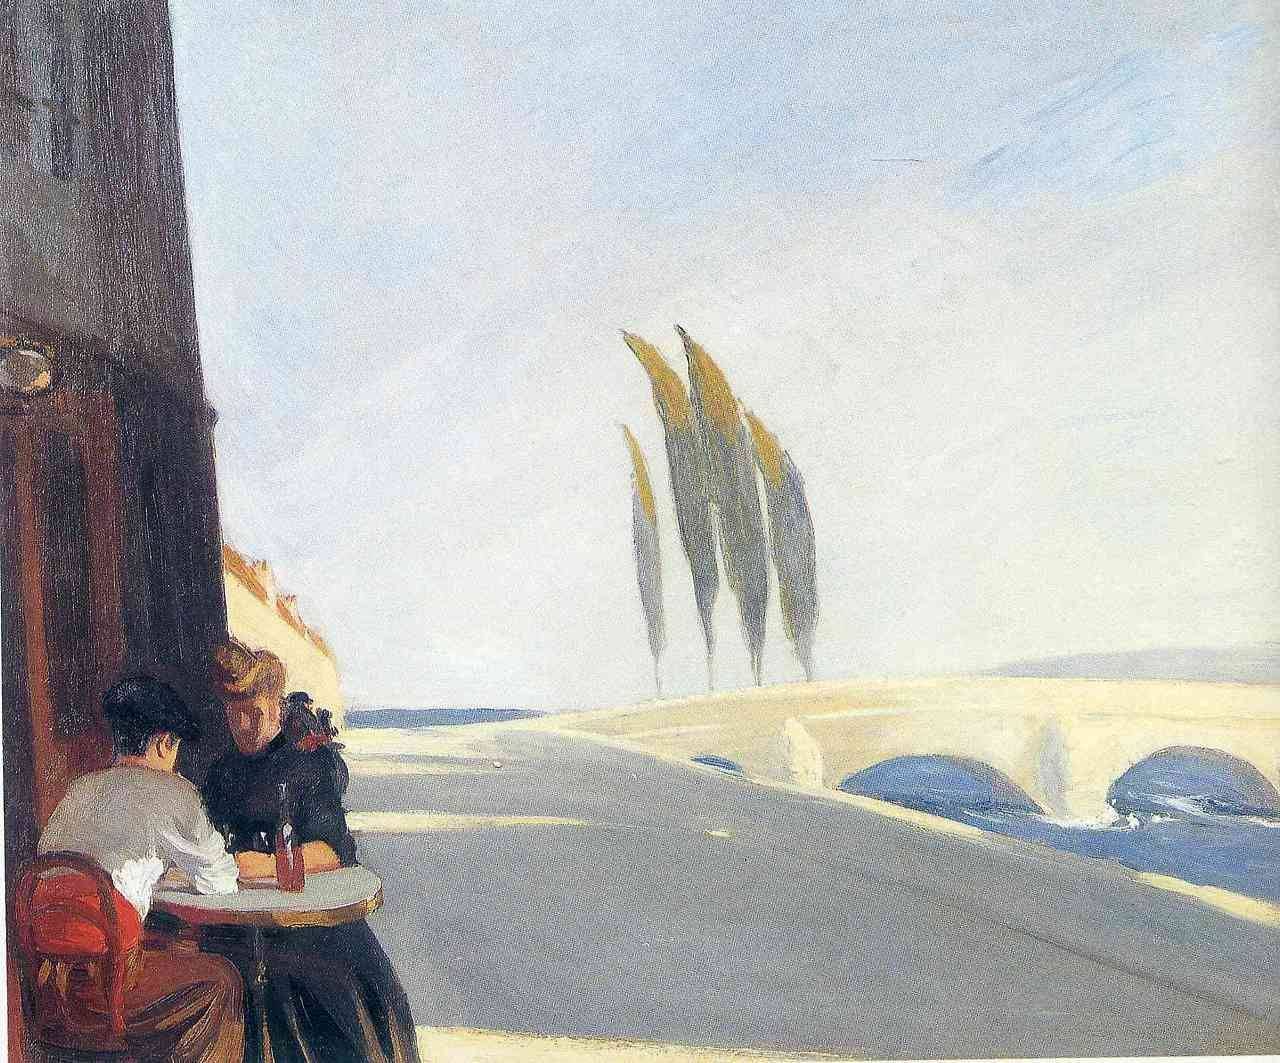 Le Bistro (The Wine Shop) by Edward Hopper - 1909 Whitney Museum of American Art